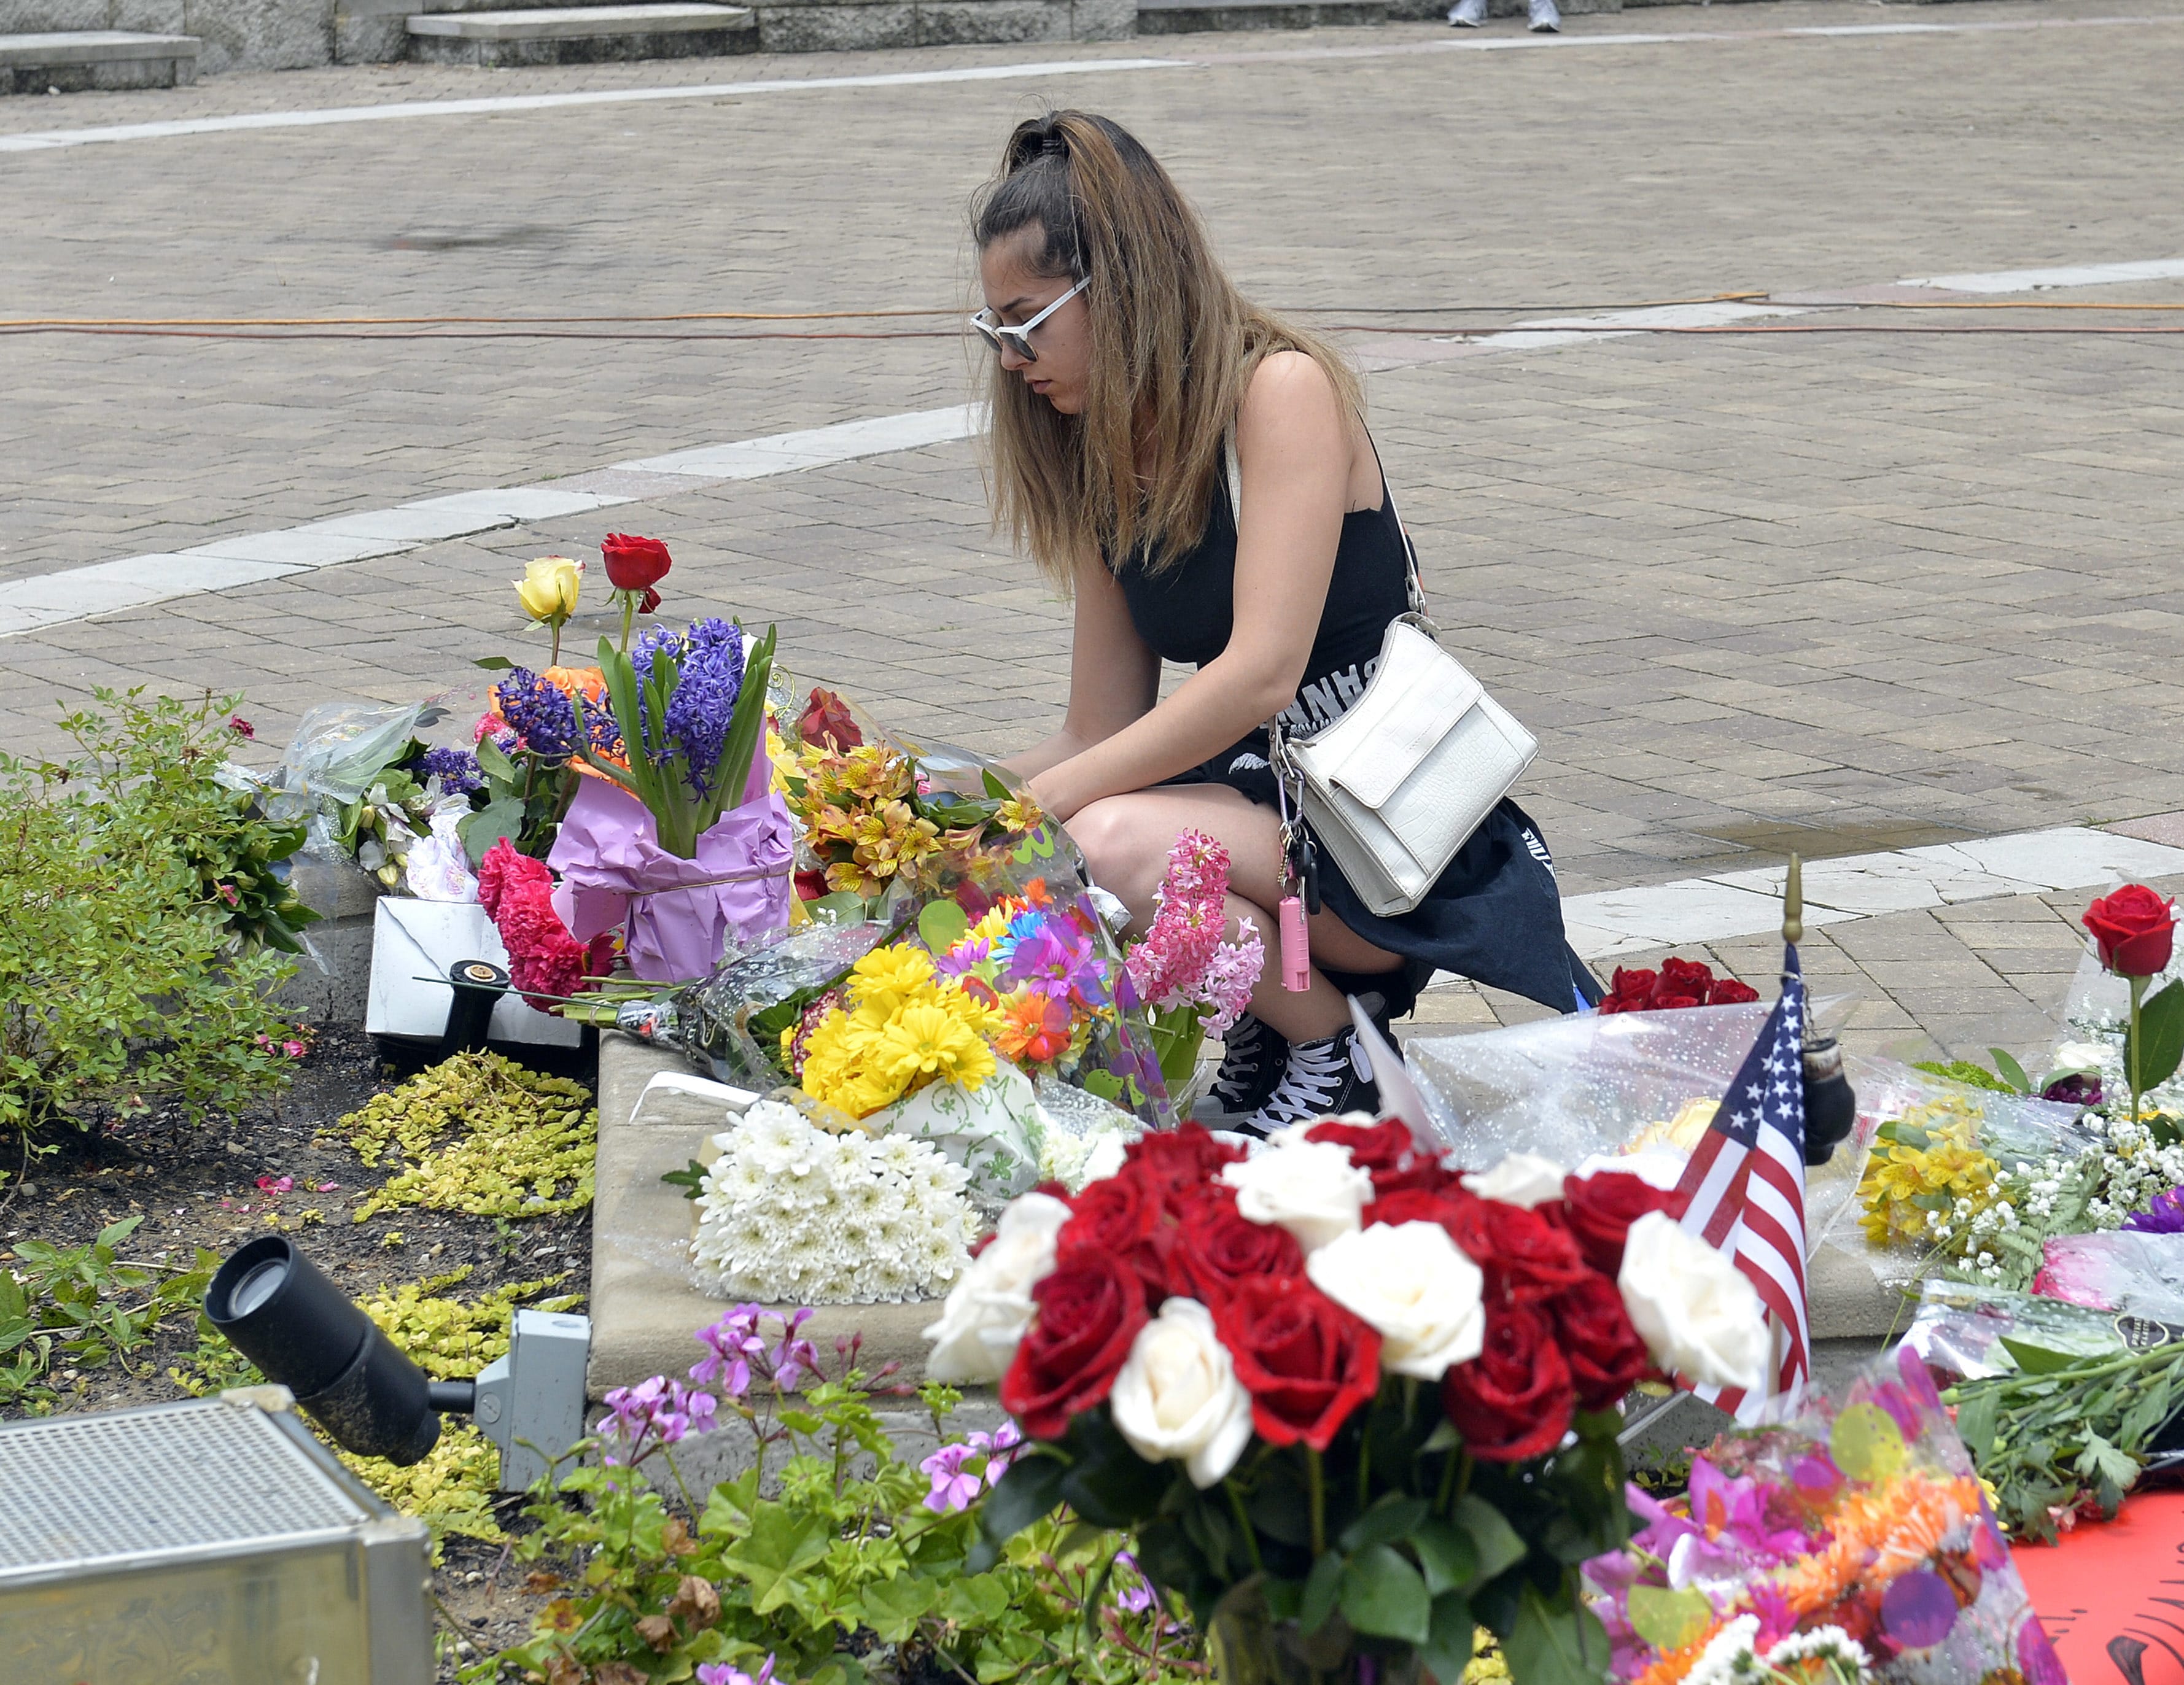 Vanessa Buzgheia, of Louisville, Ky., sets up flowers that were knocked over by the wind at a memorial to Muhammad Ali at the Muhammad Ali Center, Saturday, June 4, 2016 in Louisville Ky. Ali, the magnificent heavyweight champion whose fast fists and irrepressible personality transcended sports and captivated the world, has died according to a statement released by his family Friday, June 3. He was 74. (AP Photo/Timothy D.